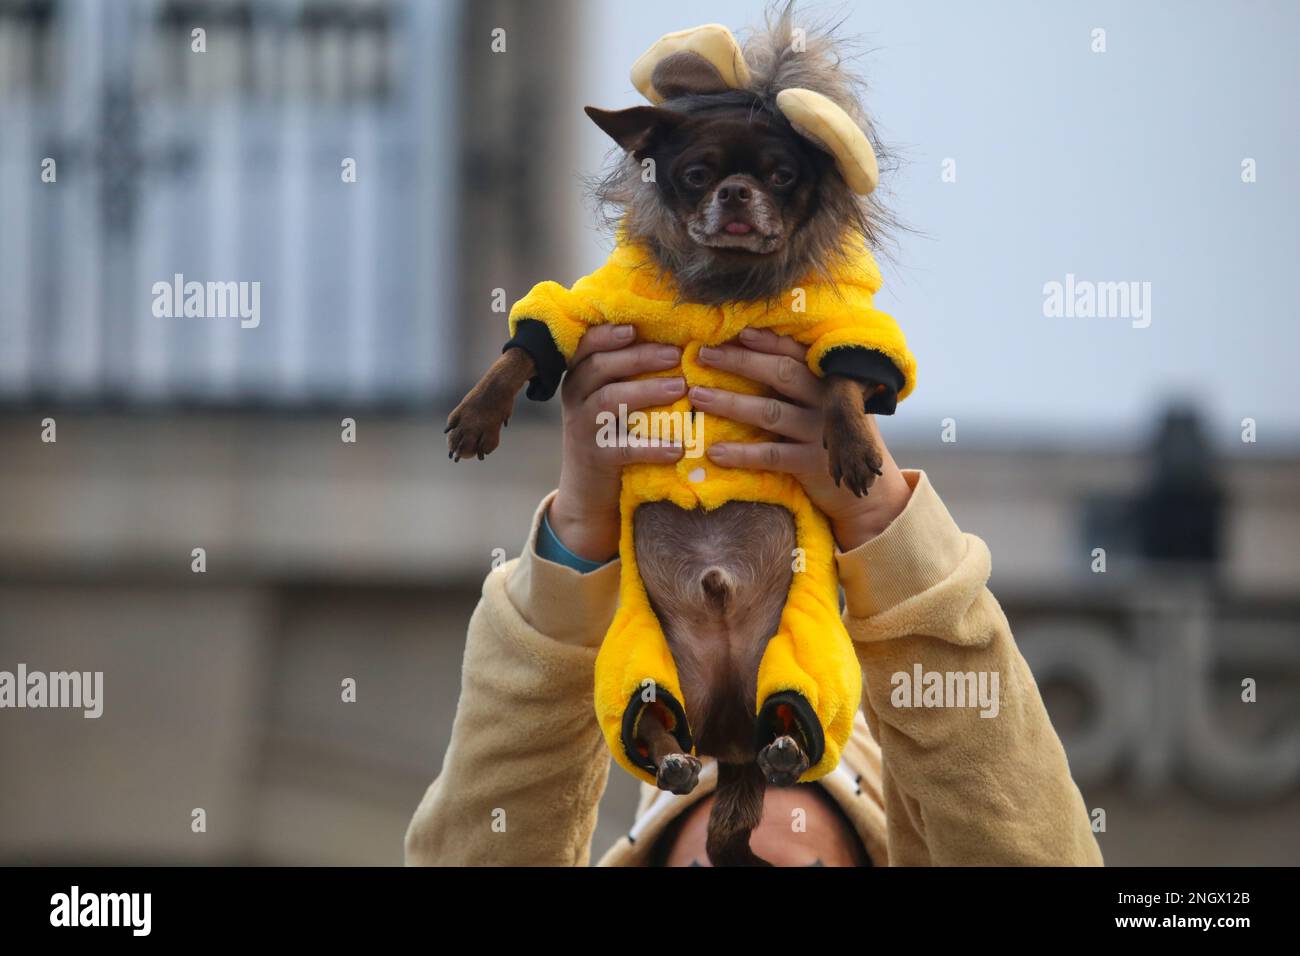 Aviles, Spain, 19th February, 2023: A dog dressed as Simba, is picked up by its owner during the Antroxaes Pet Contest on February 18, 2023, in Aviles, Spain. Credit: Alberto Brevers / Alamy Live News Stock Photo